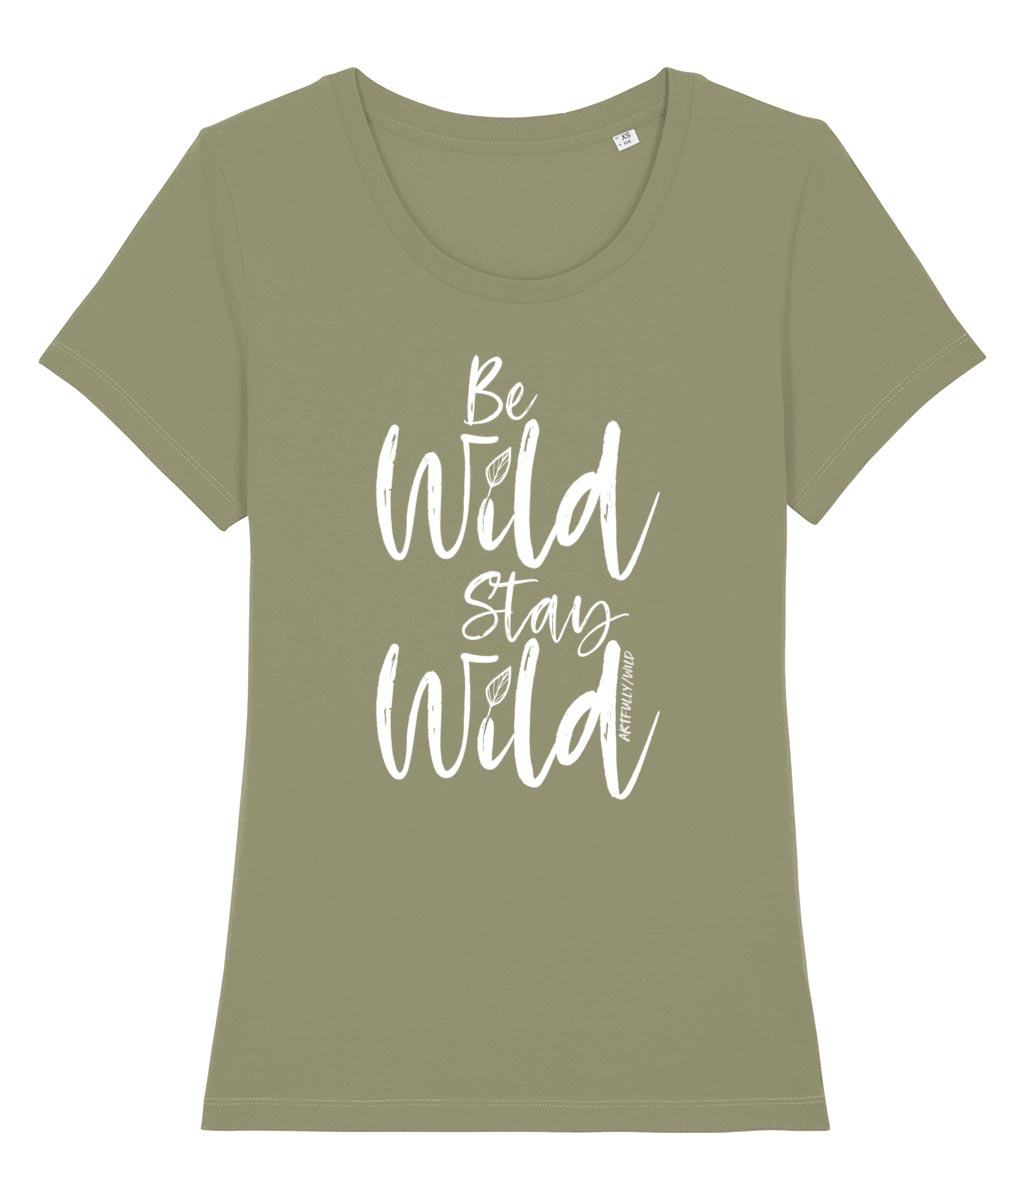 ‘BE WILD STAY WILD’ Women's Sage Green Fitted T-Shirt. Eco-friendly organic cotton. White slogan print with water-based inks.